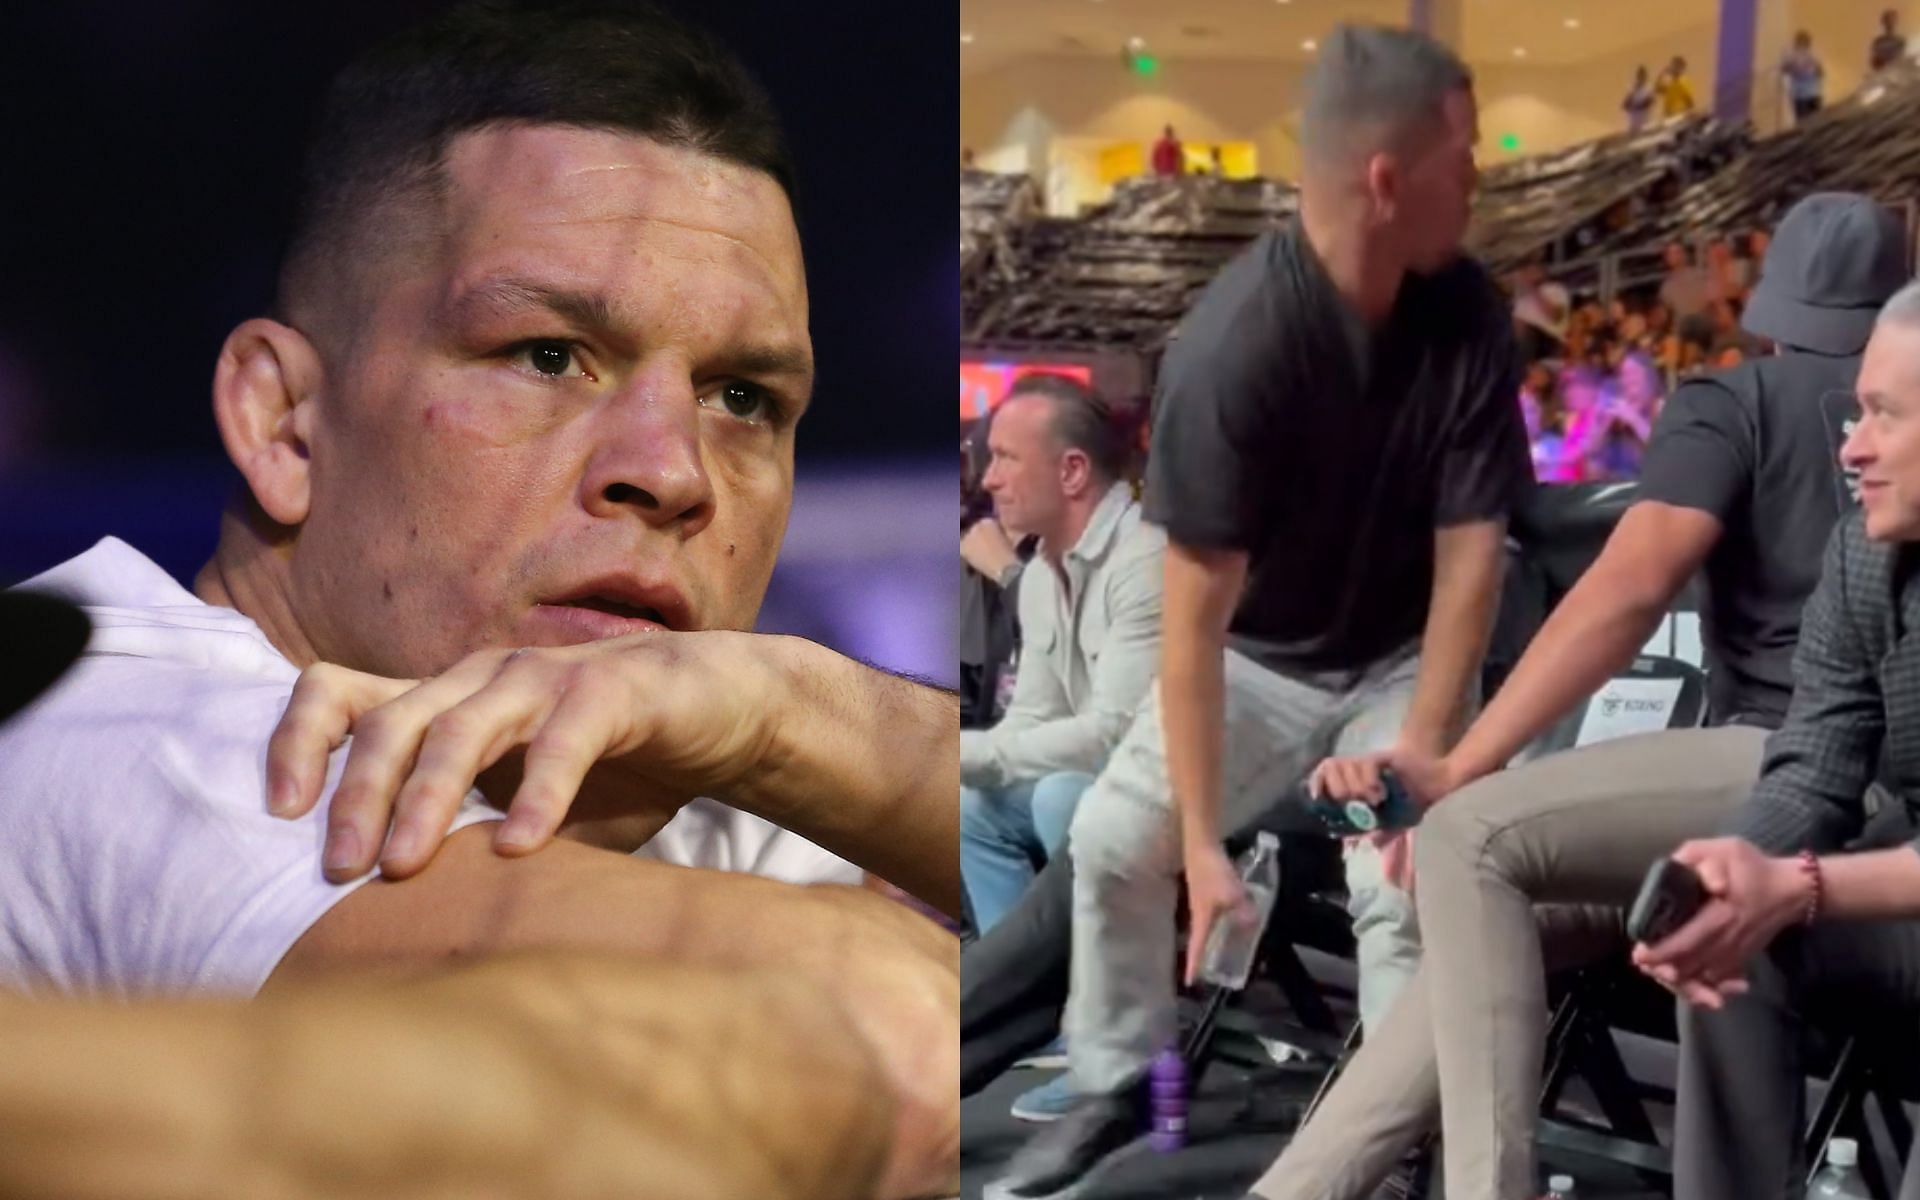 Nate Diaz (Left); Diaz with a bottle of water (Right) [Image courtesy: left image via Getty Images; right image via @MisfitsBoxing Twitter account]